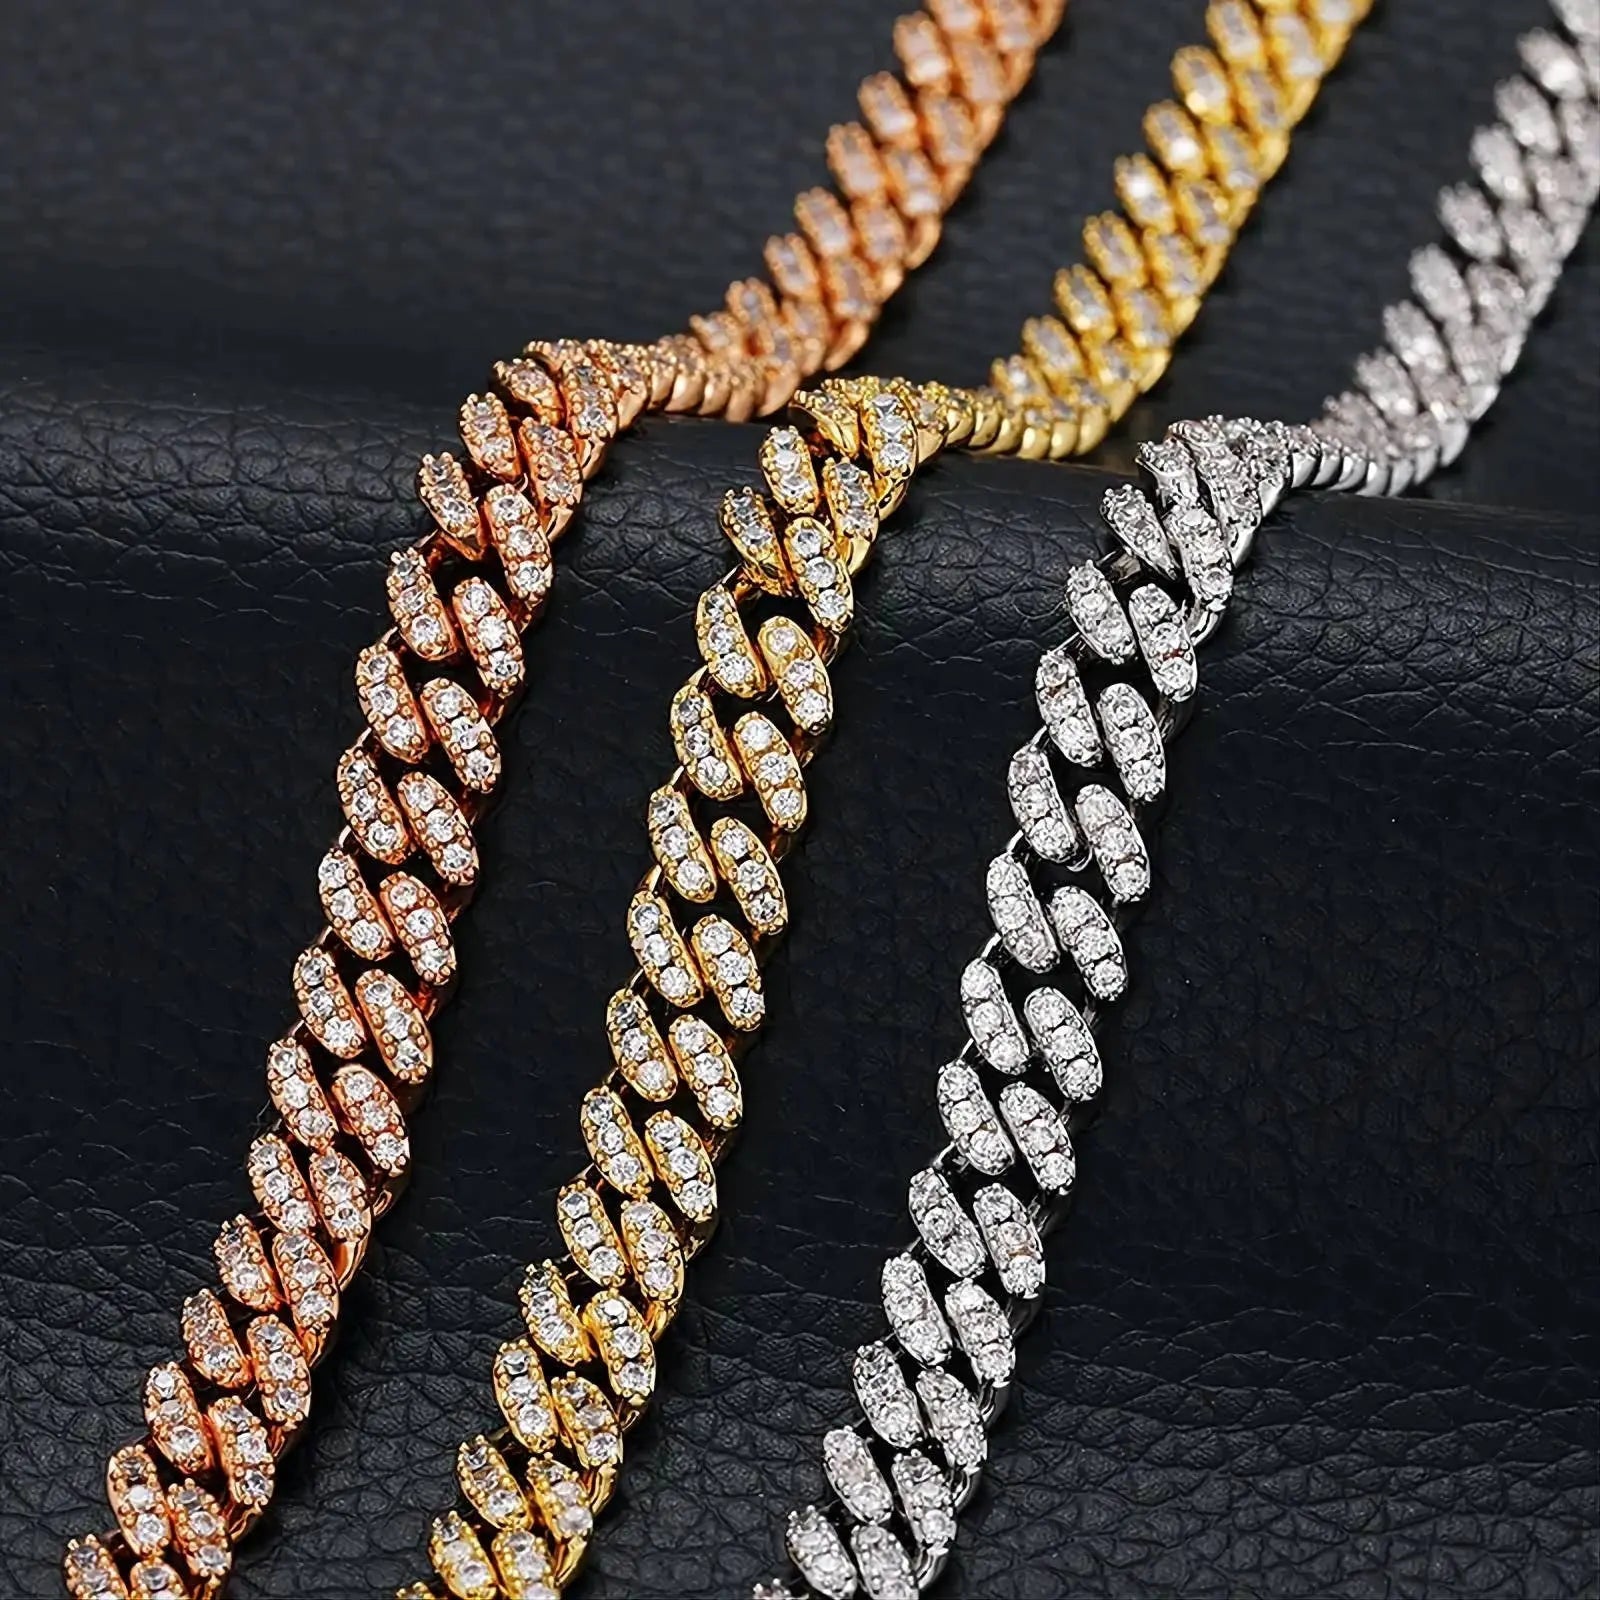 6/8mm Iced Out Chain Cuban Link Diamond Chain Bracelet 18k Gold/White/Rose Gold Plated Miami Bling Drip Chains and Bracelets JettsJewelers